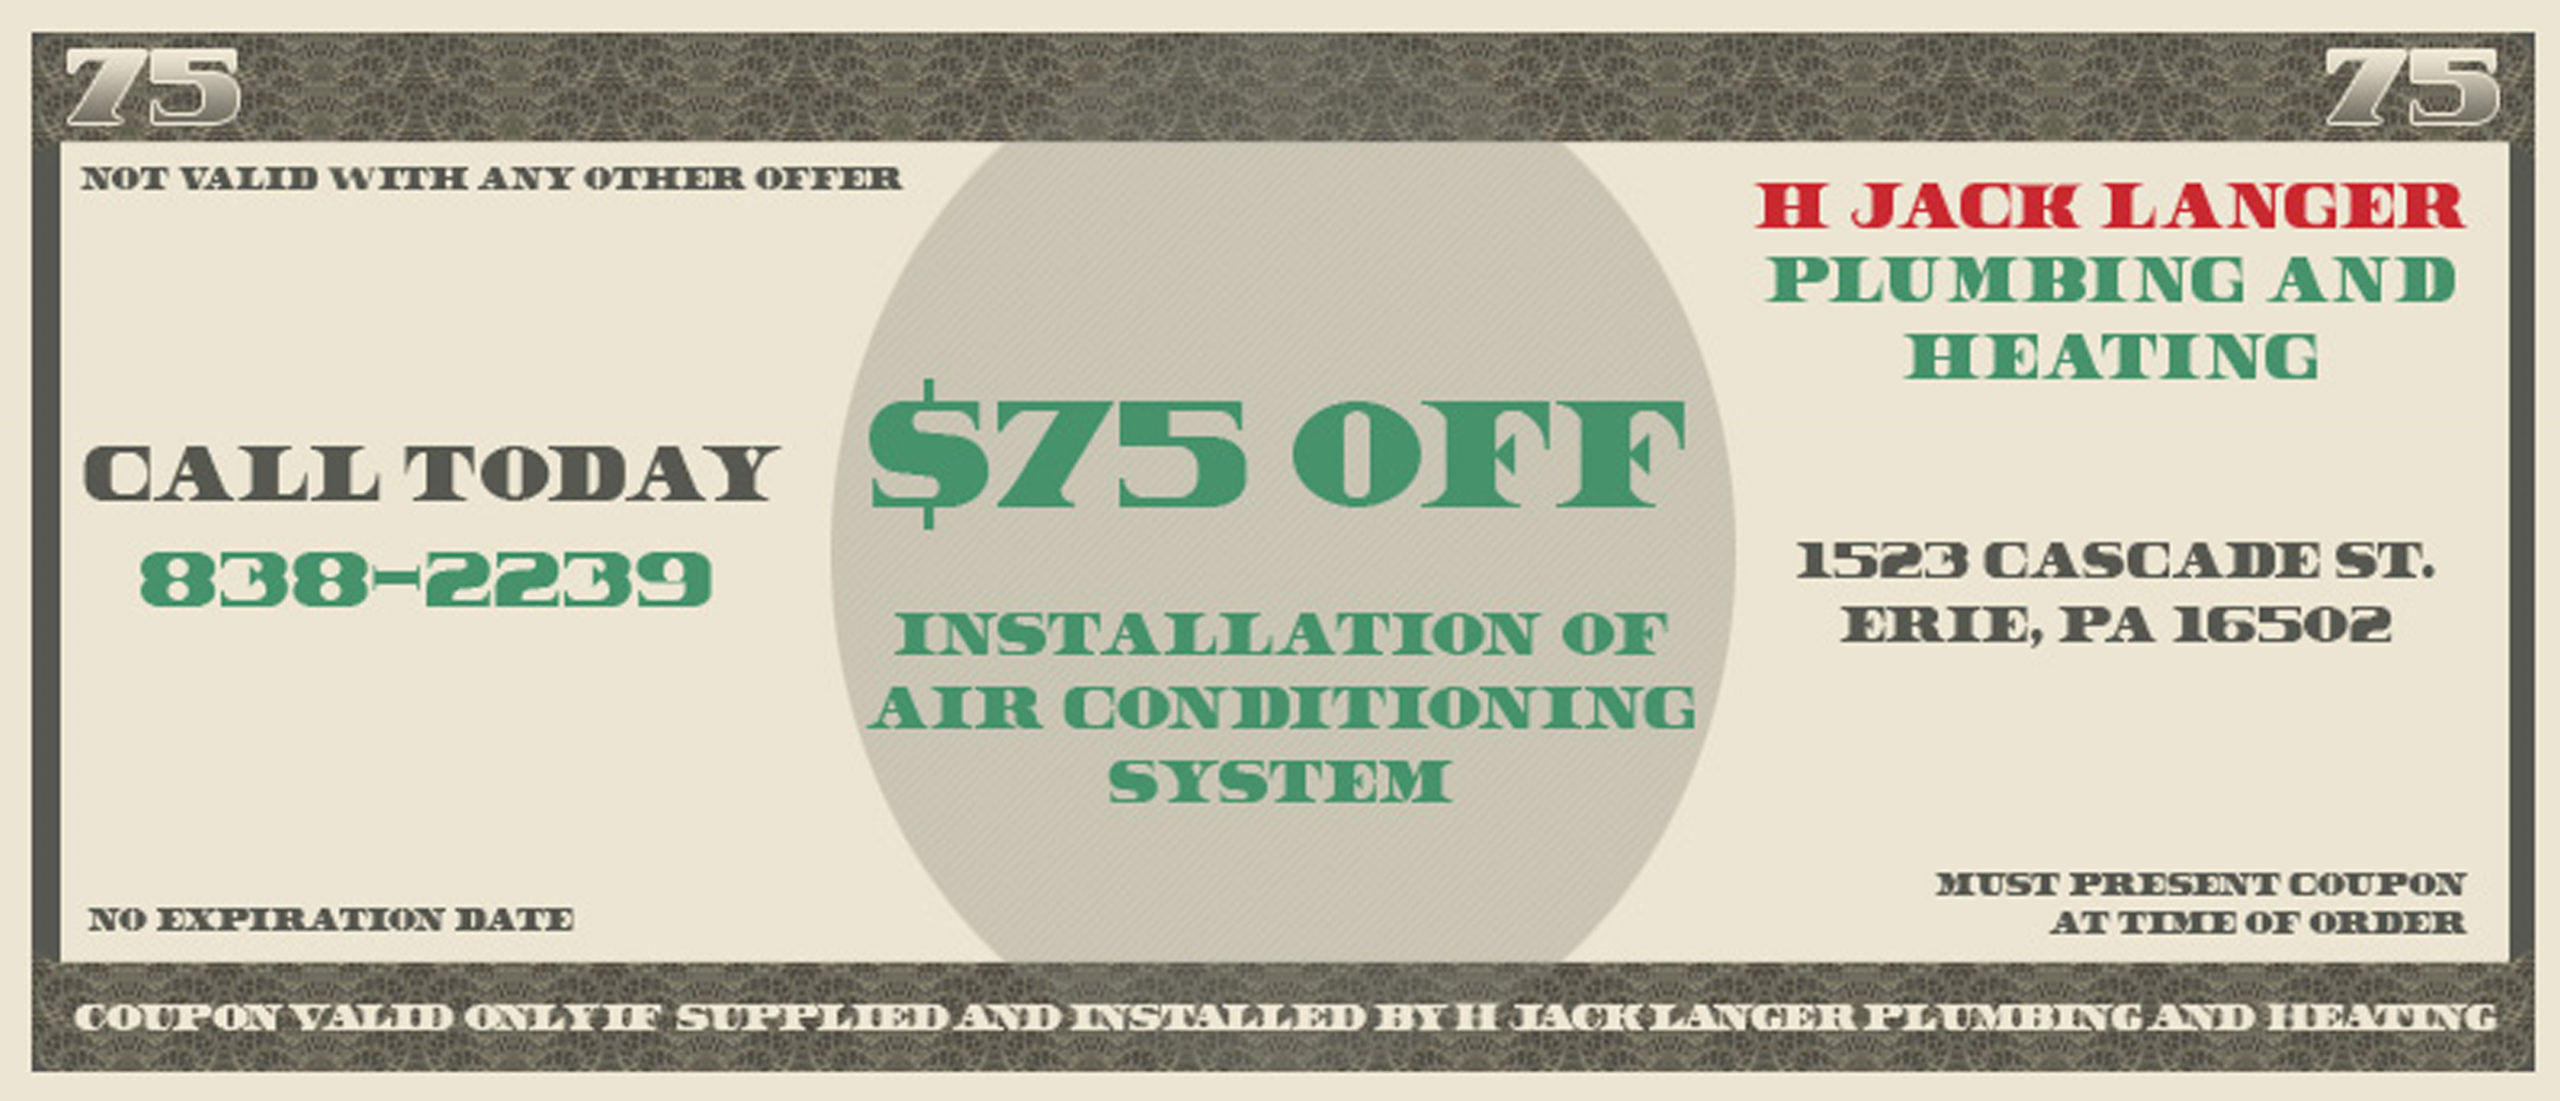 $75 Off Air Conditioning Installation System Coupon